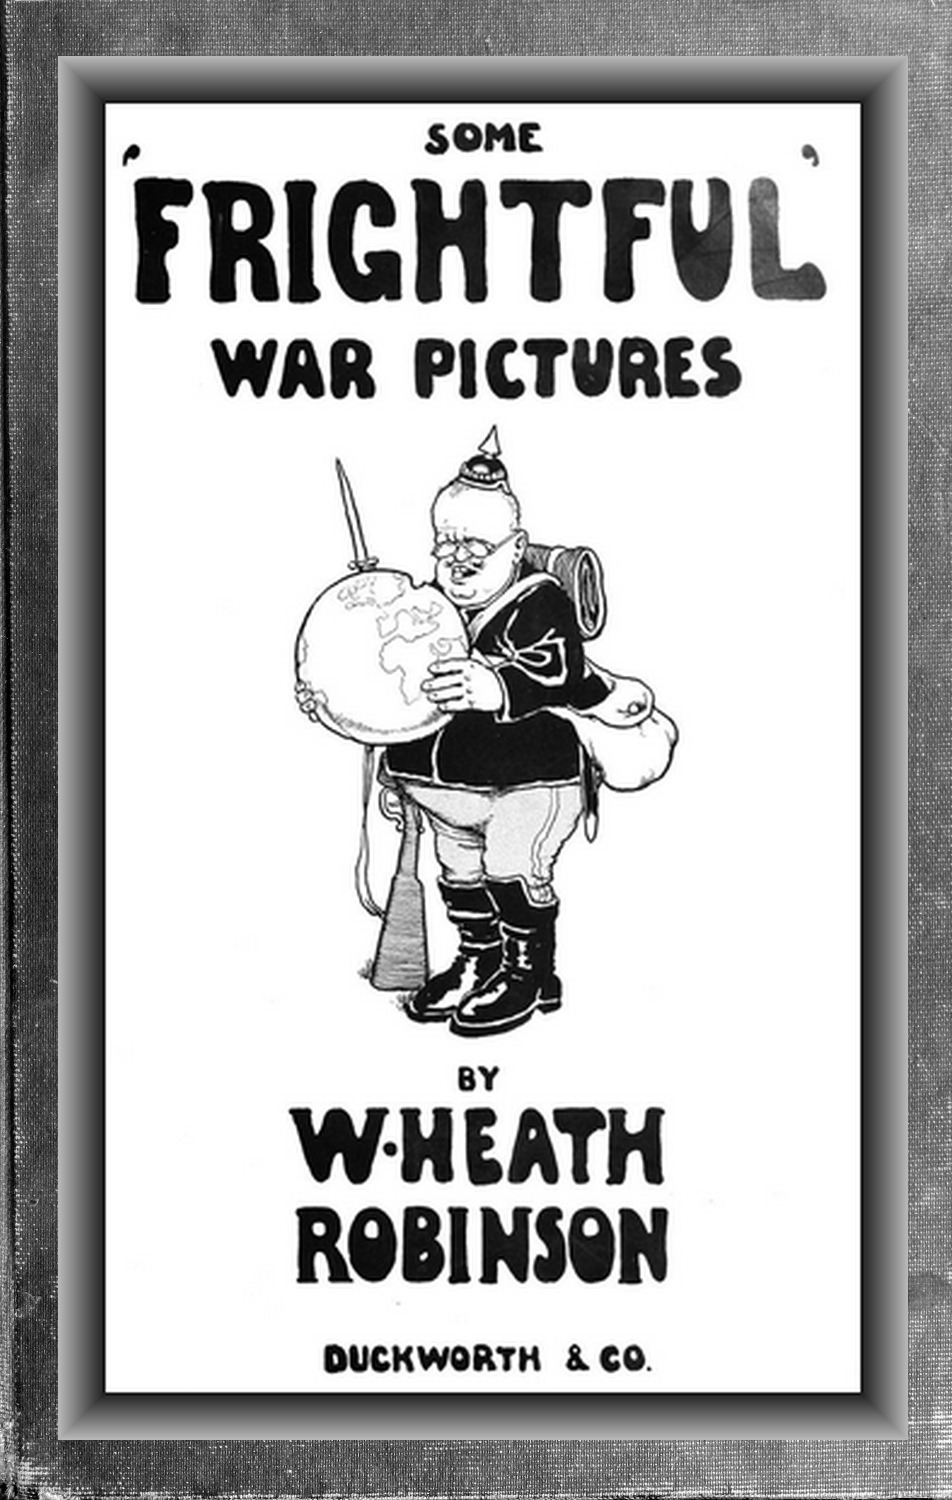 Some 'Frightful' War Pictures